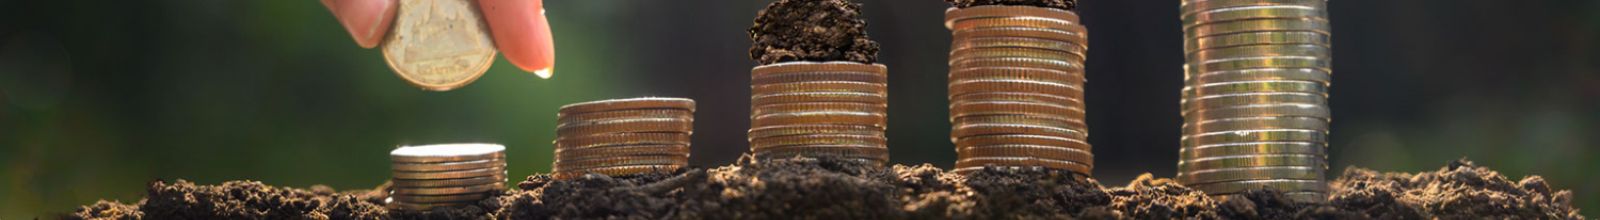 A person puts down a coin on a pile